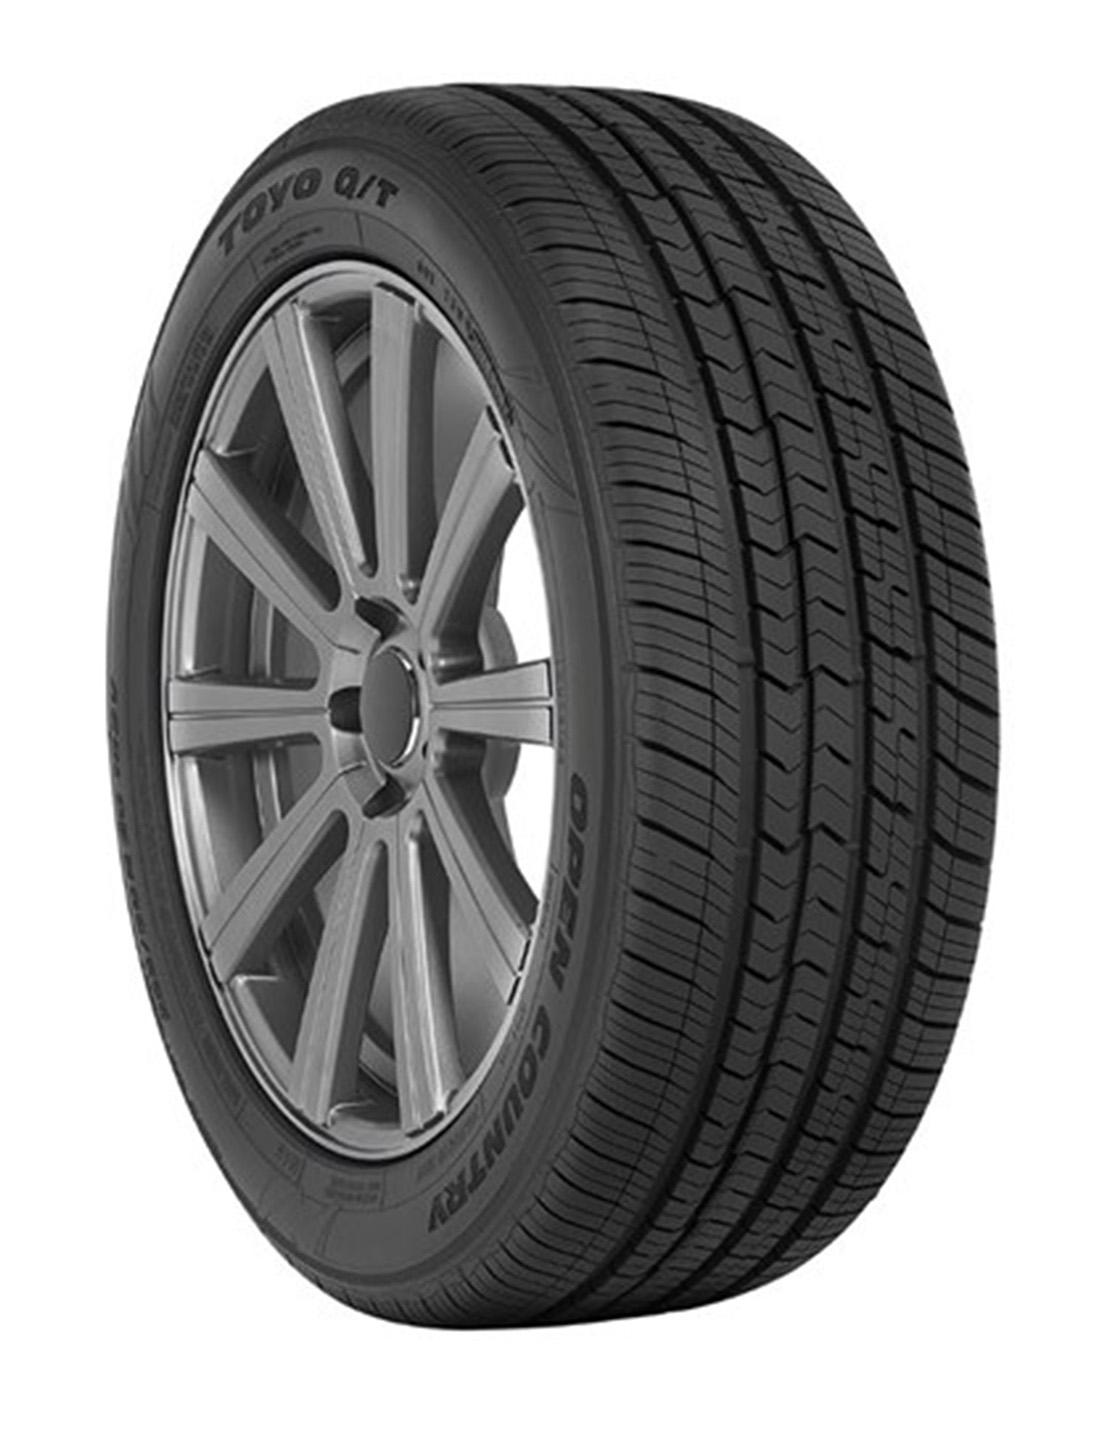 Toyo - OPEN COUNTRY QT HT  NW  255/60R17